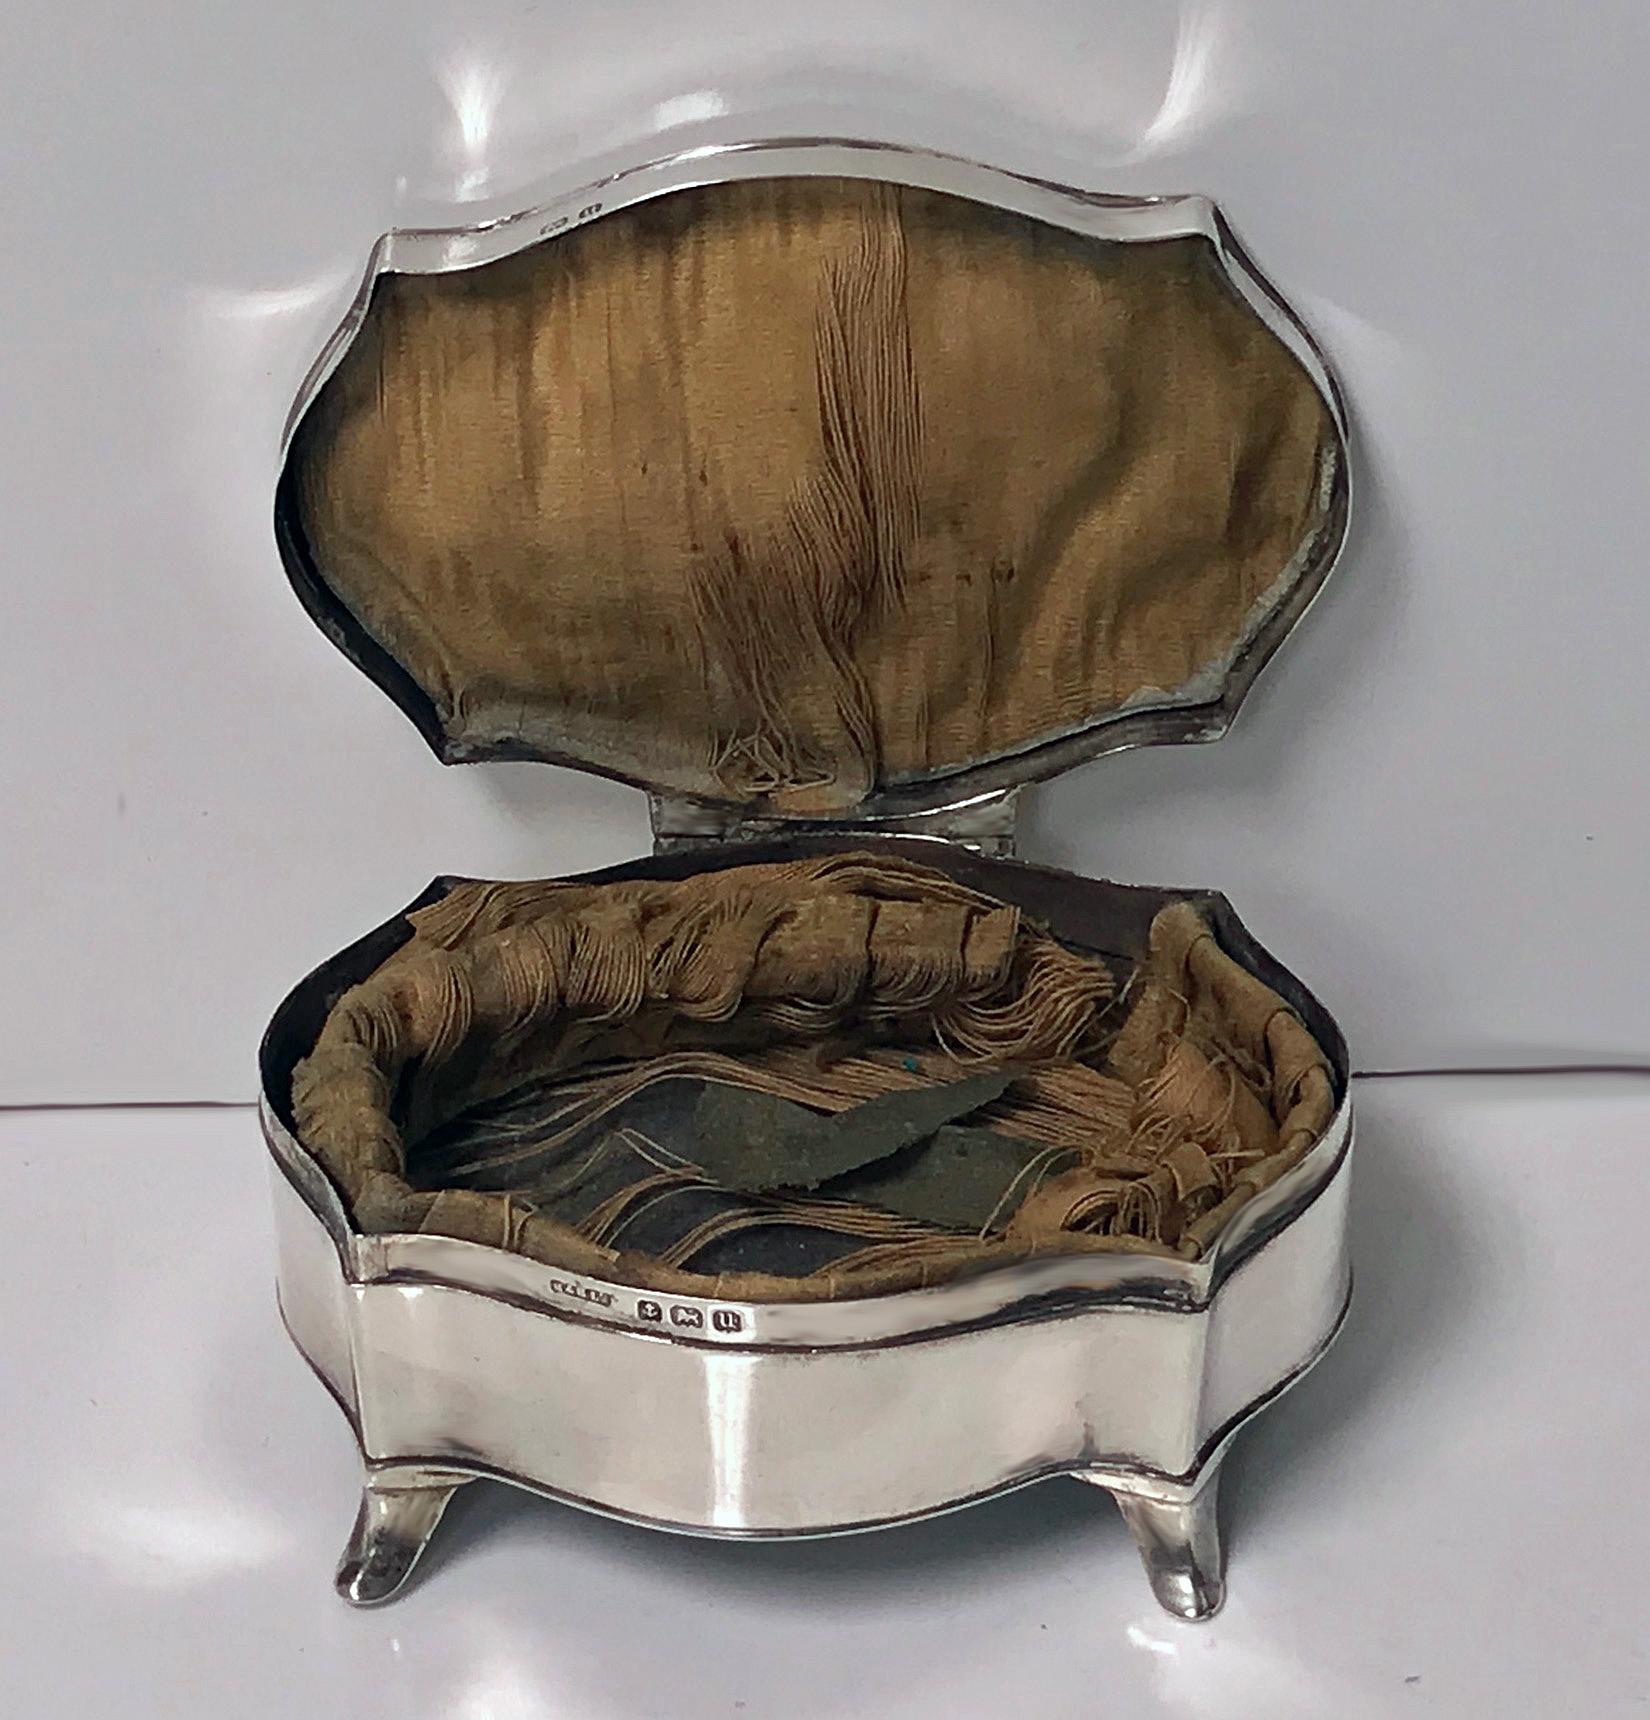 Antique Silver Jewellery  Box, Birmingham 1919, Hassett and Harper Ltd. The box in the form of a commode, engine turned hinged lid engraved Doris, with original gold satin interior, now distressed, curvilinear panel surround, on four turned